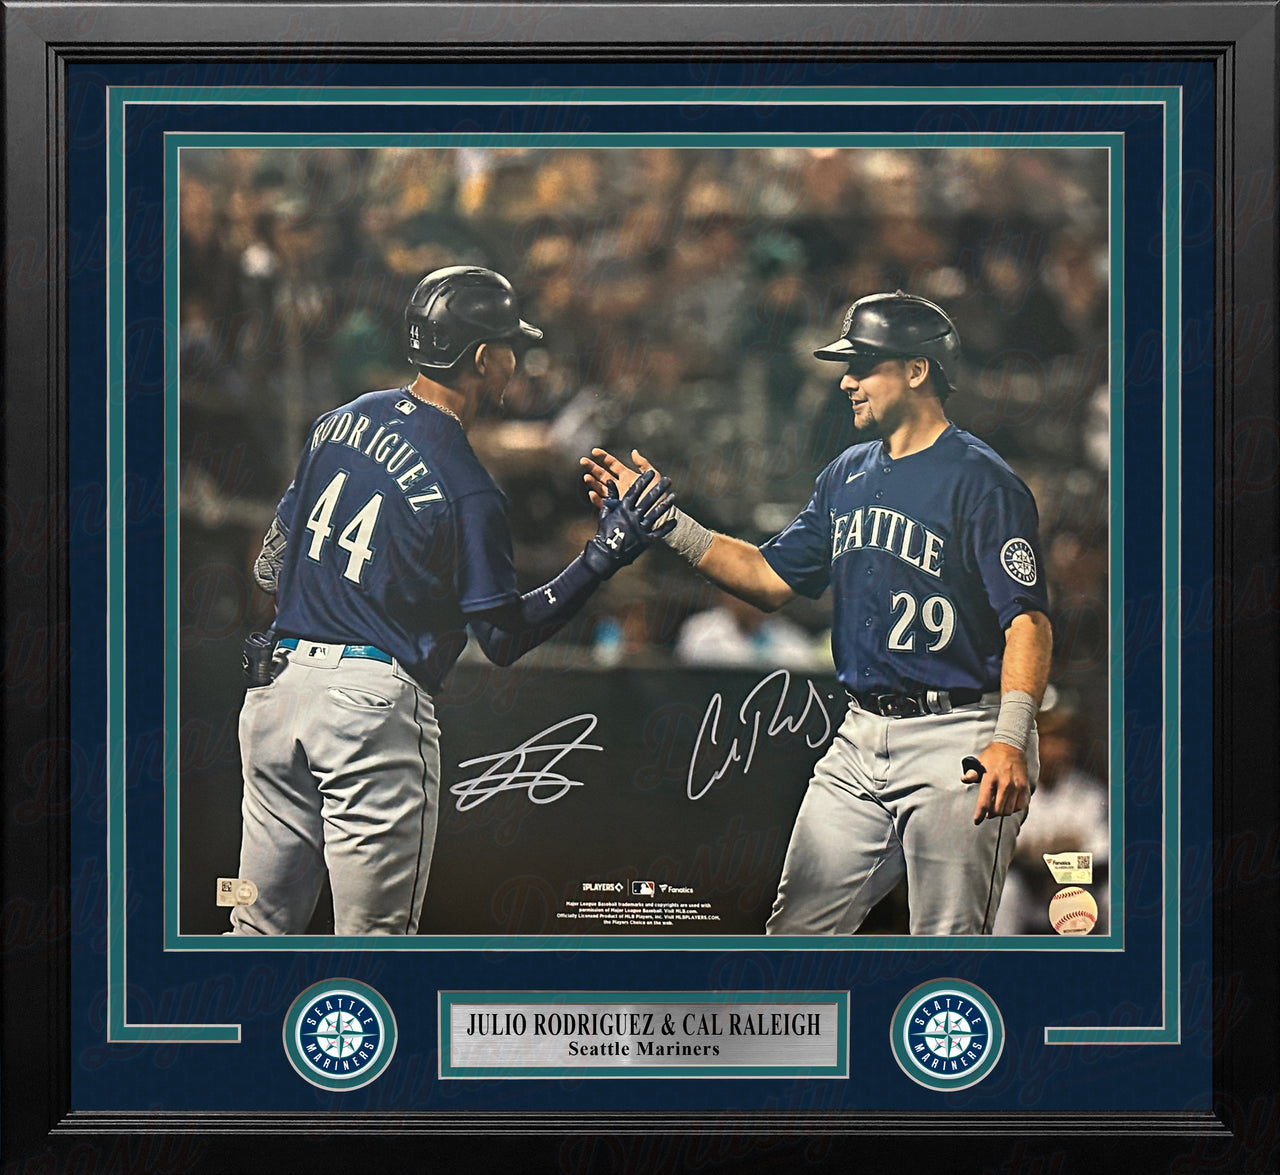 Julio Rodriguez & Cal Raleigh Seattle Mariners Autographed 16" x 20" Framed Baseball Photo